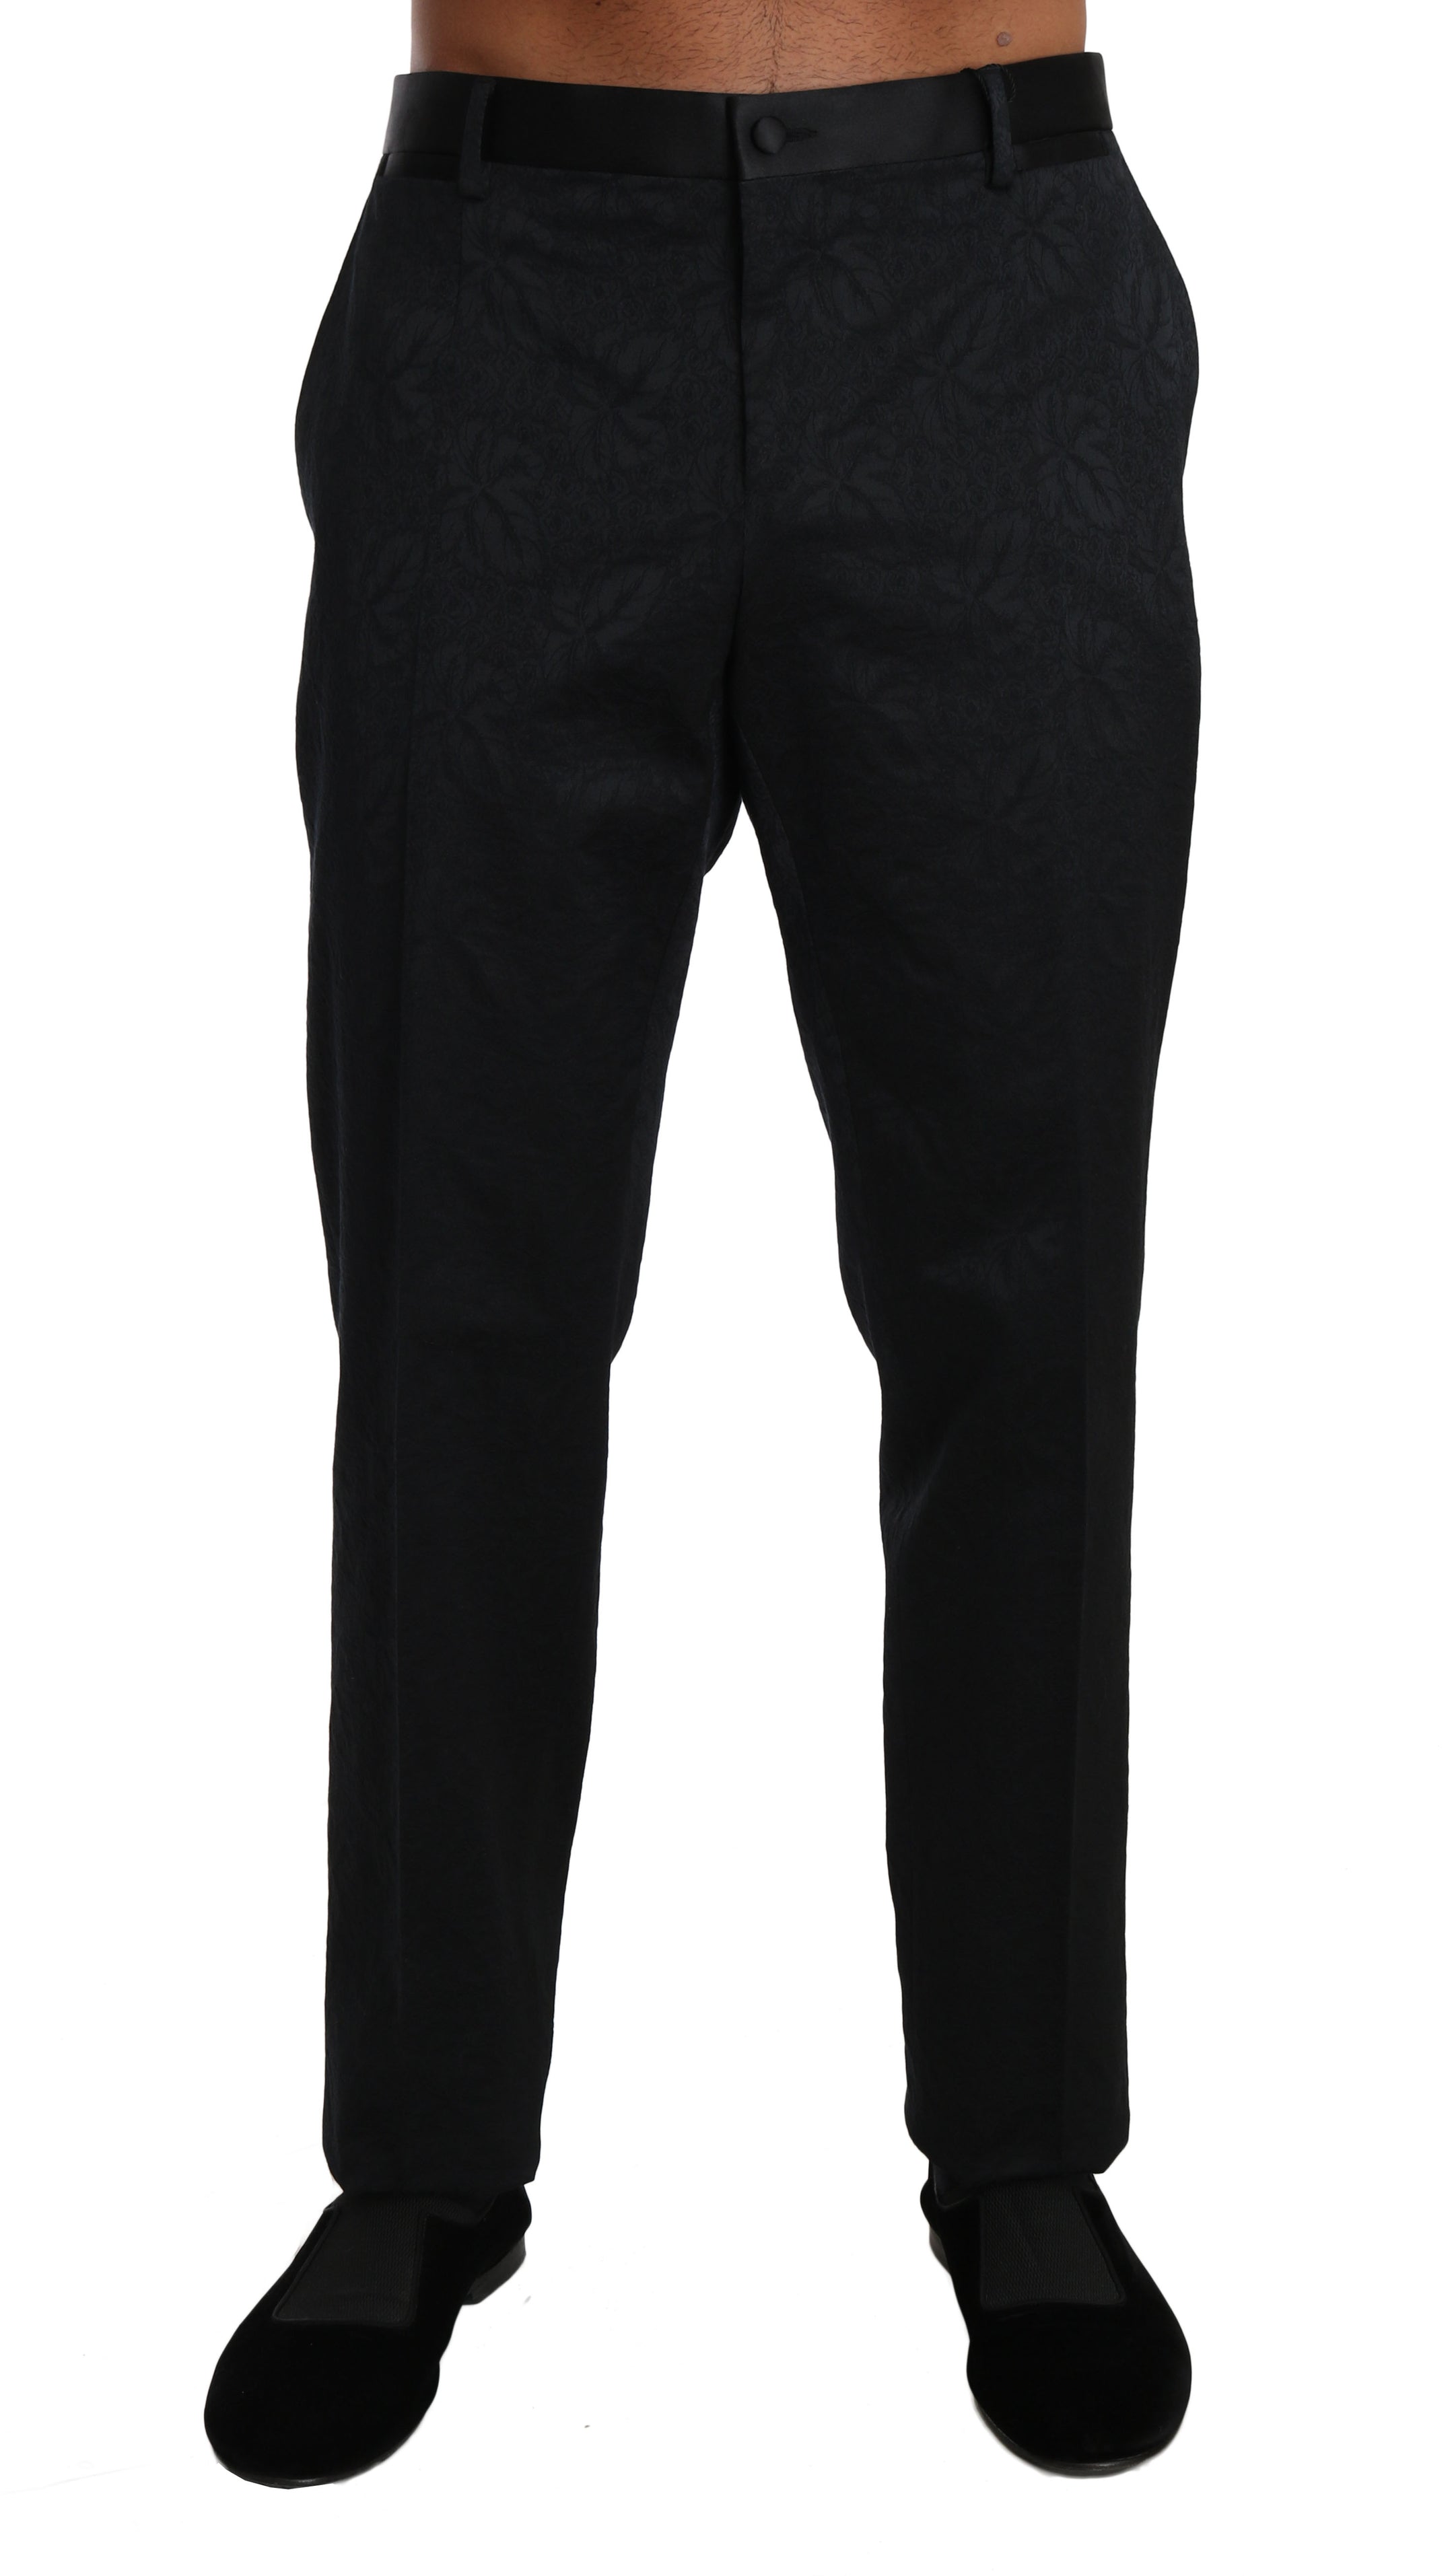 Buy Black Cotton Brocade Formal Trousers Pants by Dolce & Gabbana